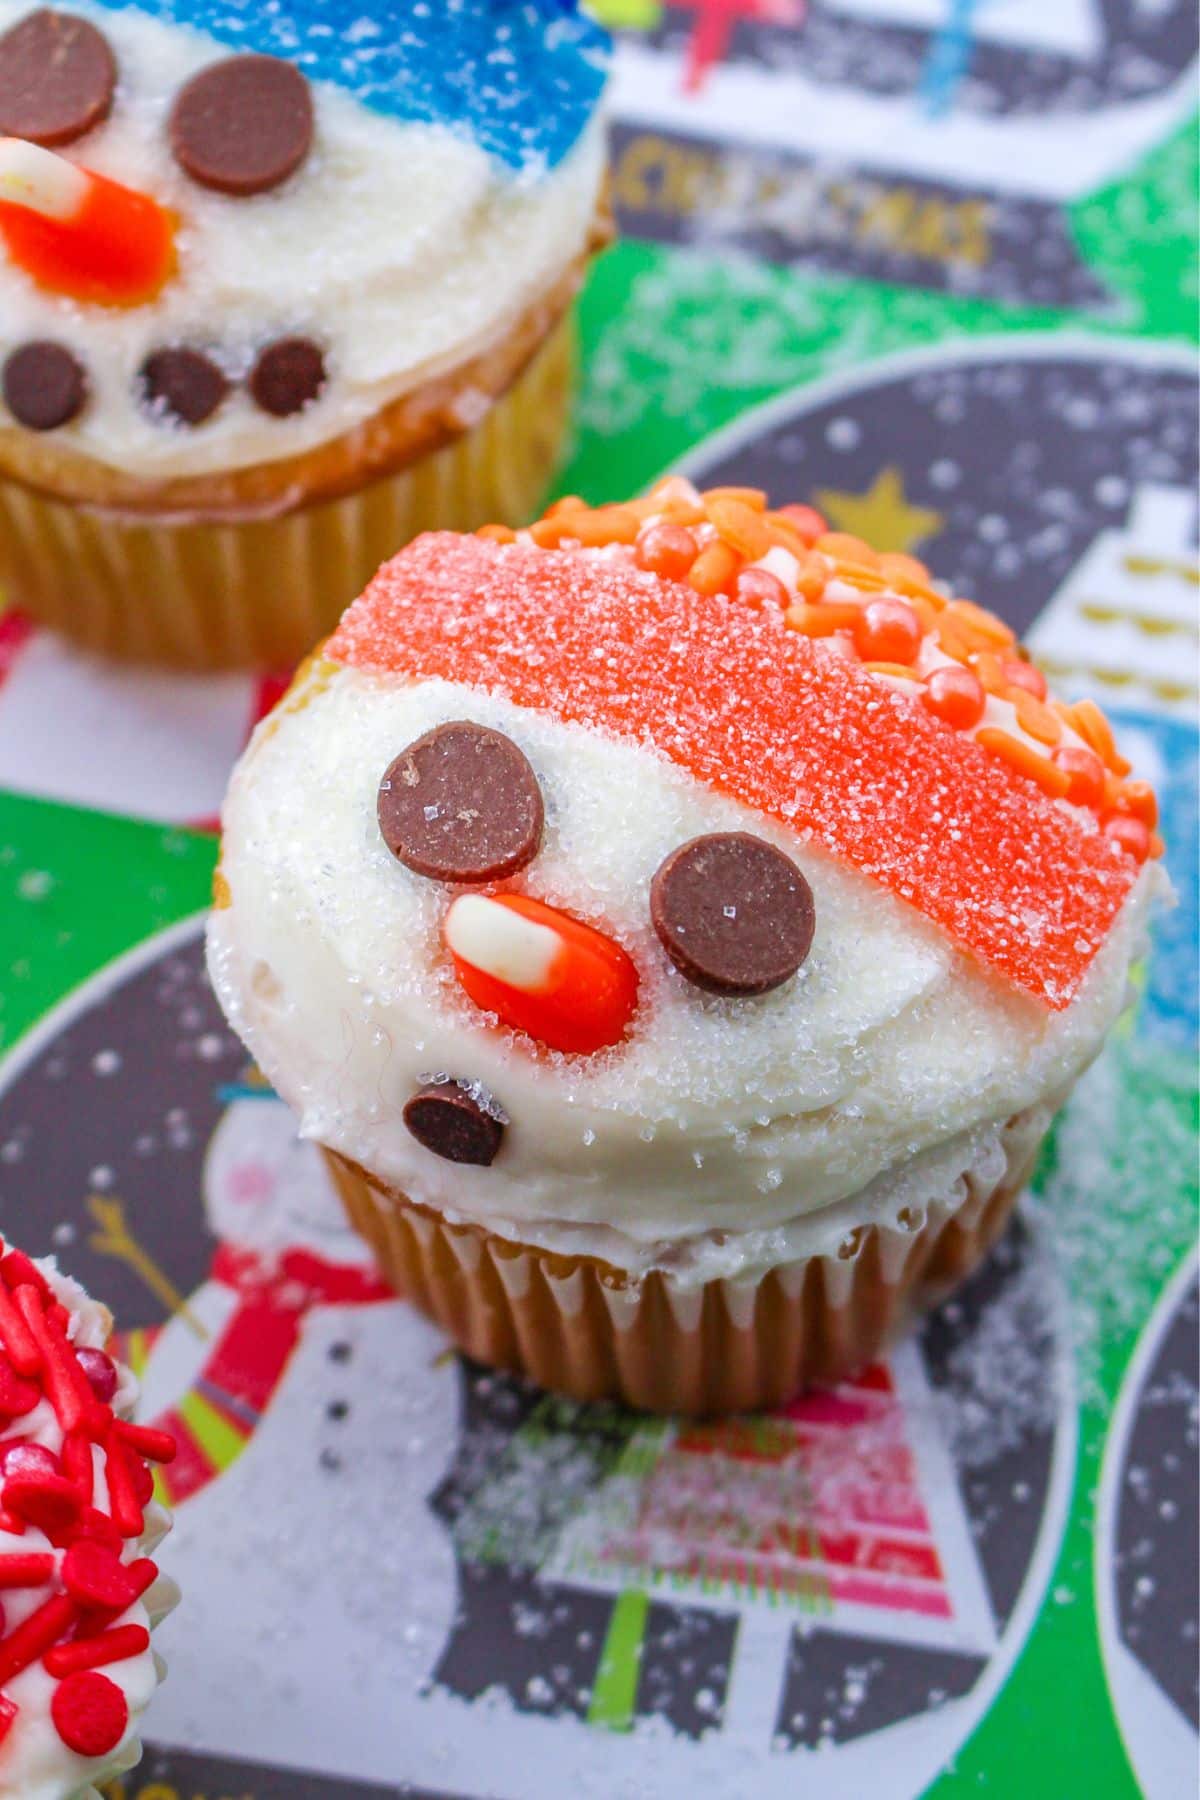 Snowman Cupcakes: Three adorable cupcakes meticulously decorated to resemble snowmen.